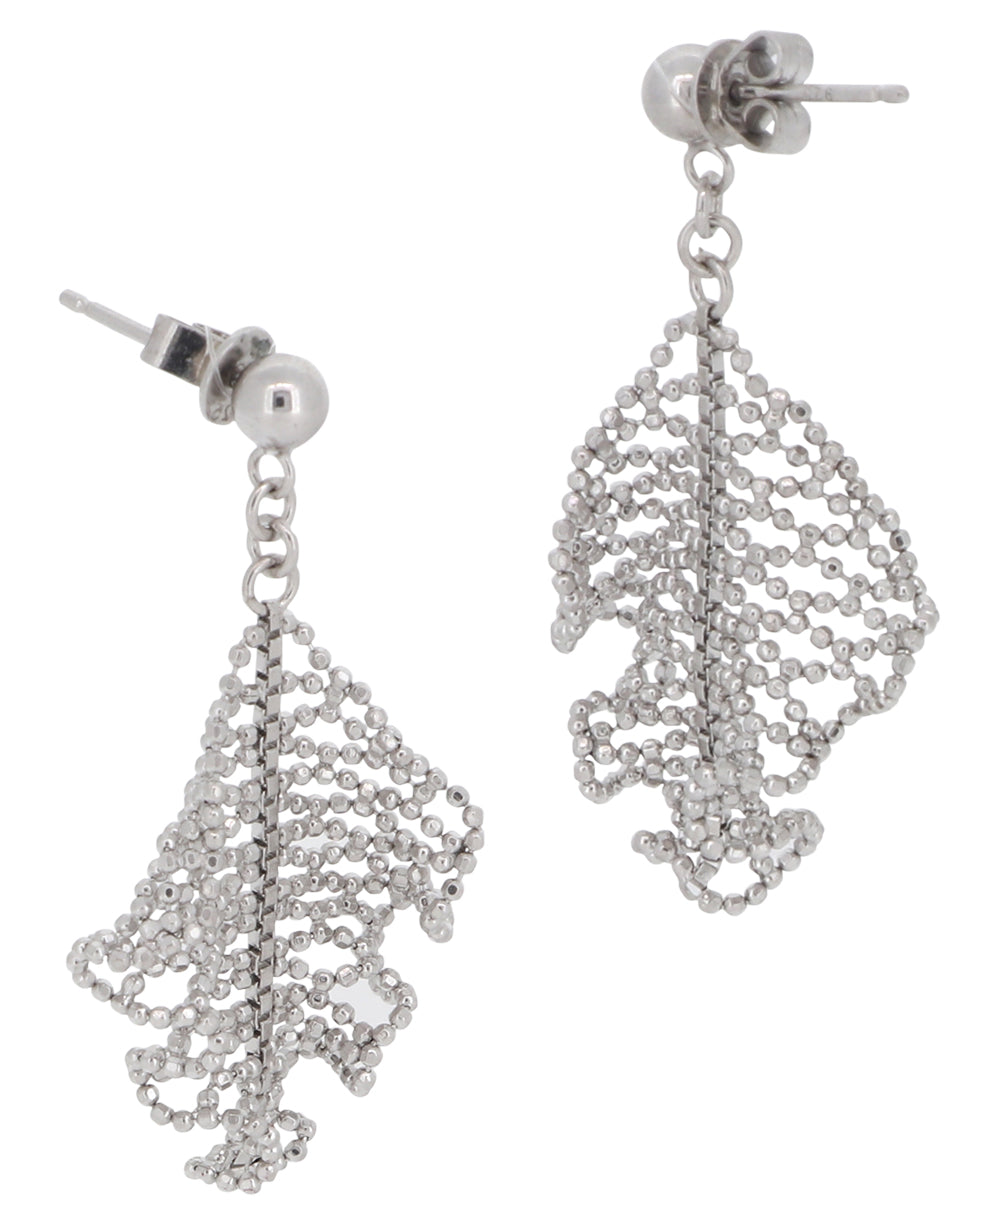 Fine Hill-Tribe silver fringe earrings with post and butterfly hooks, handcrafted in Laos